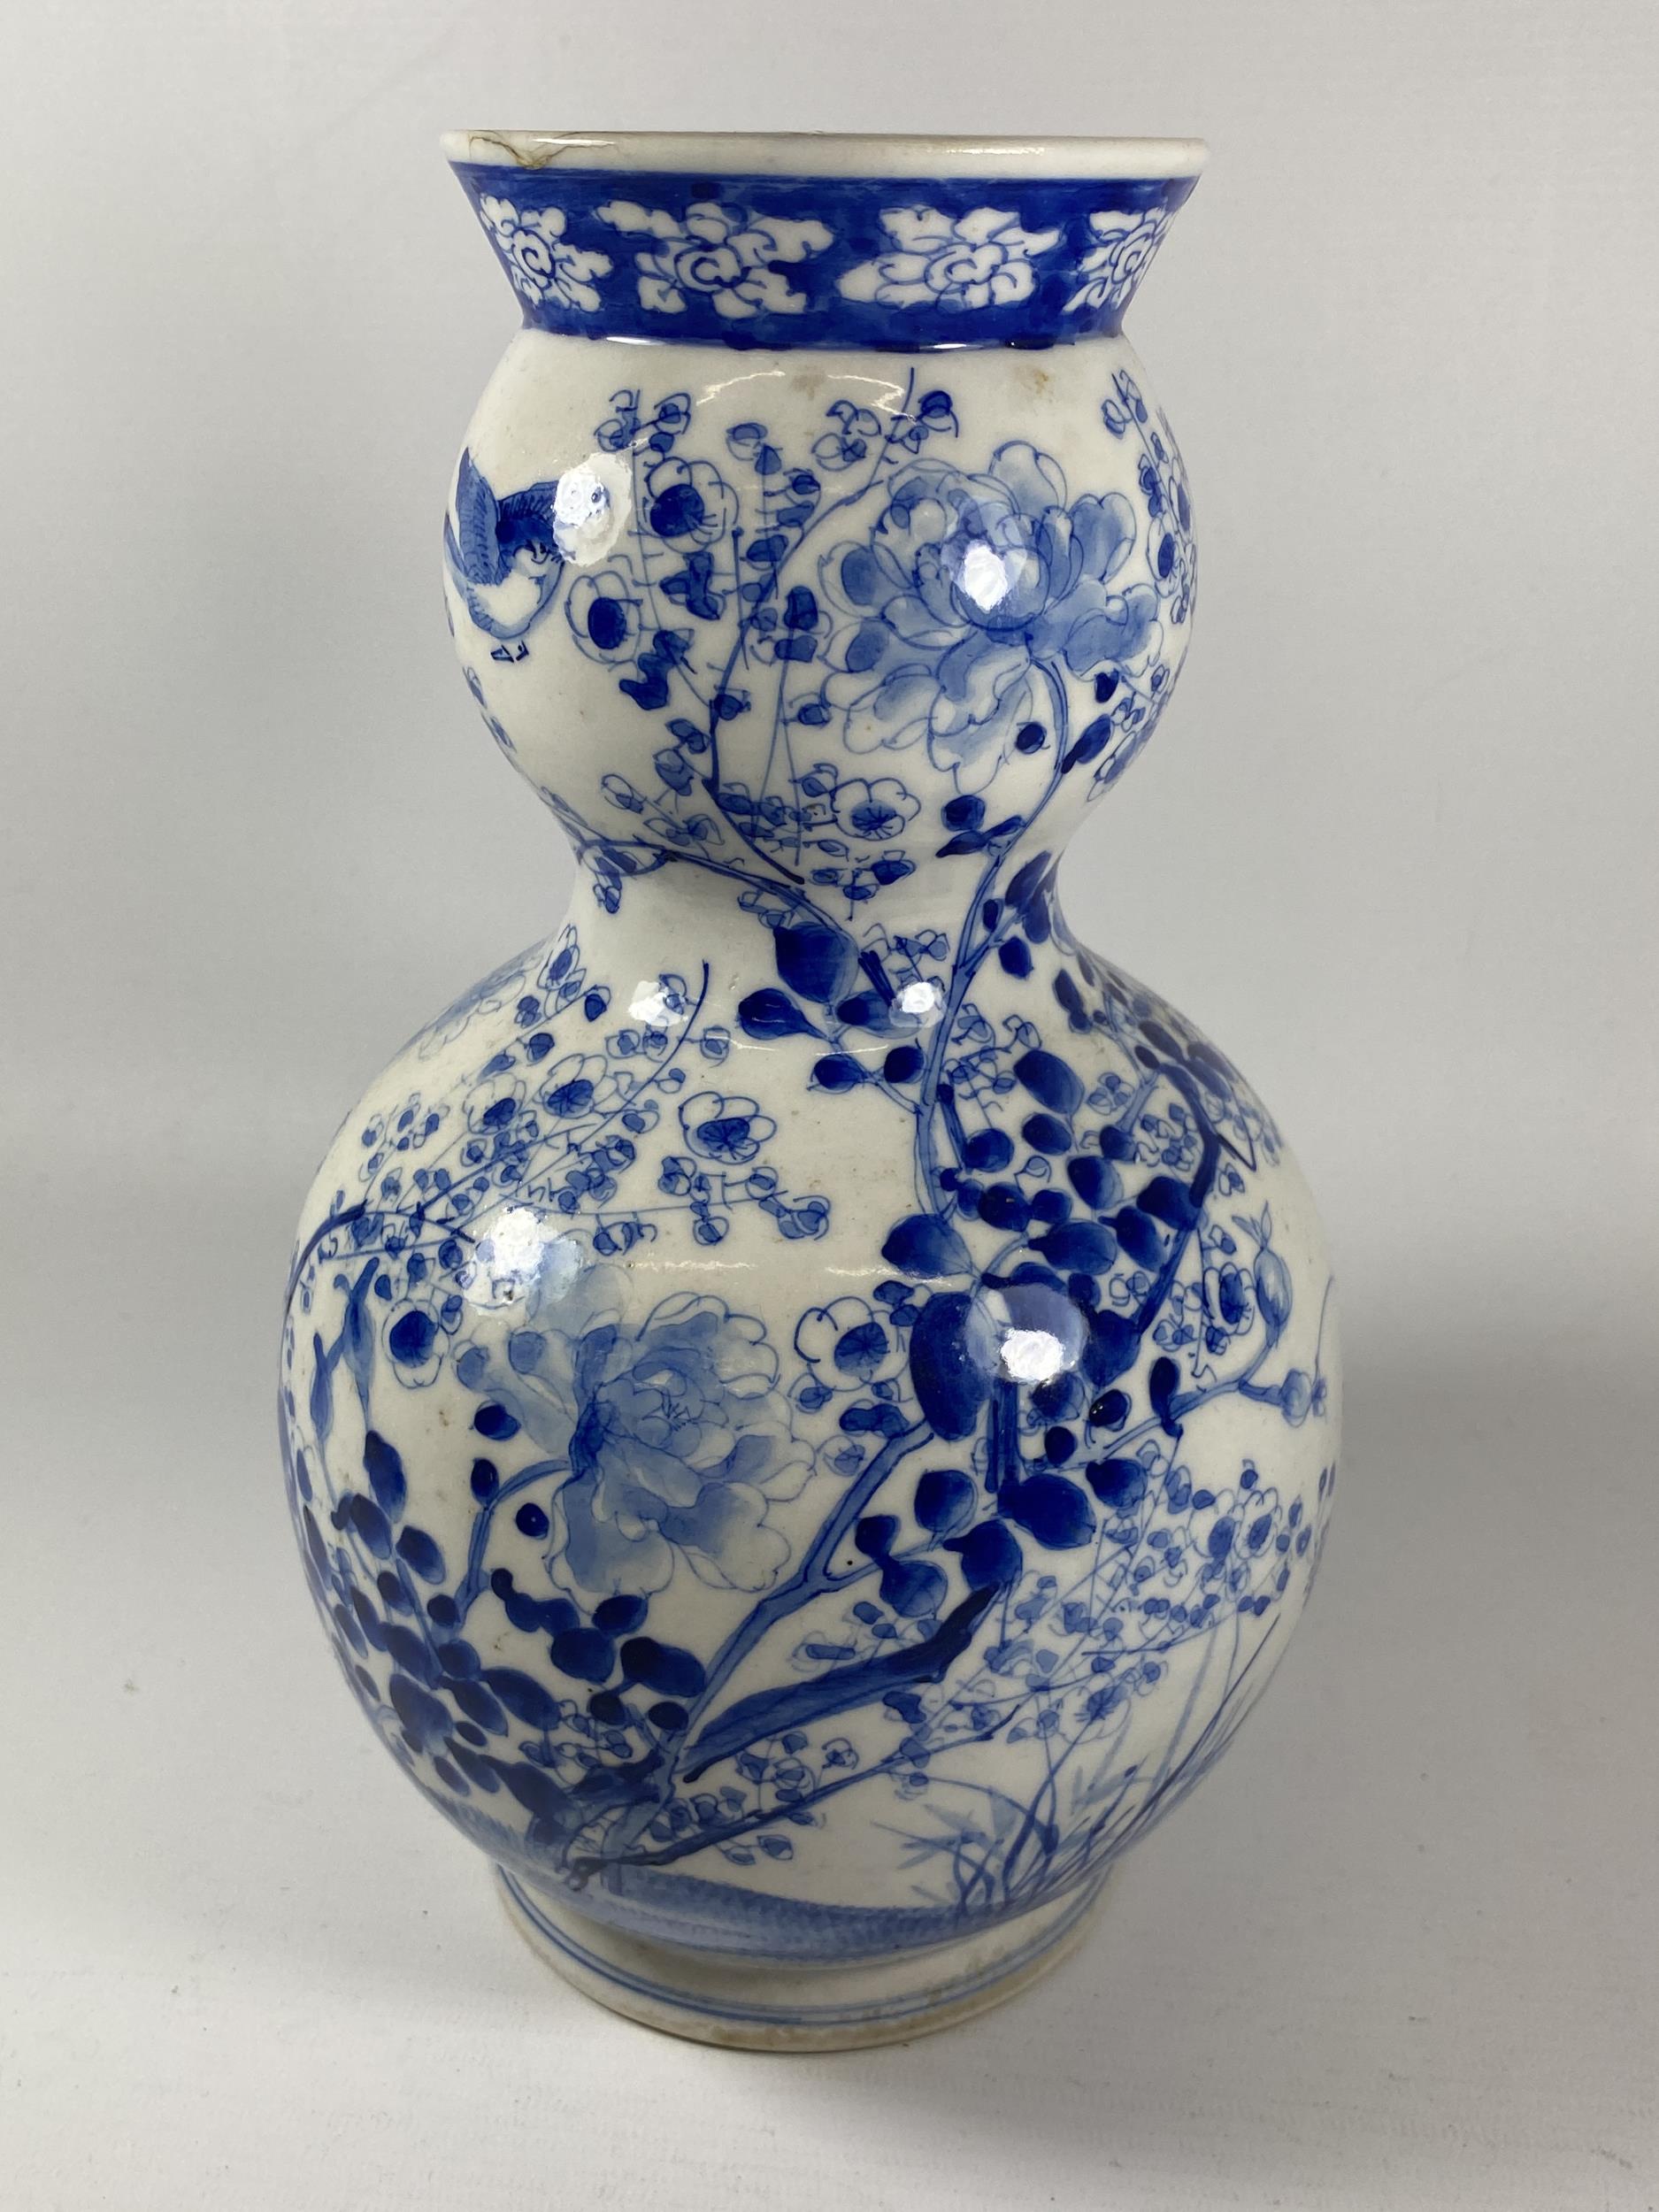 A JAPANESE MEIJI PERIOD (1868-1912) BLUE AND WHITE DOUBLE GOURD VASE, HEIGHT 26CM - Image 3 of 5